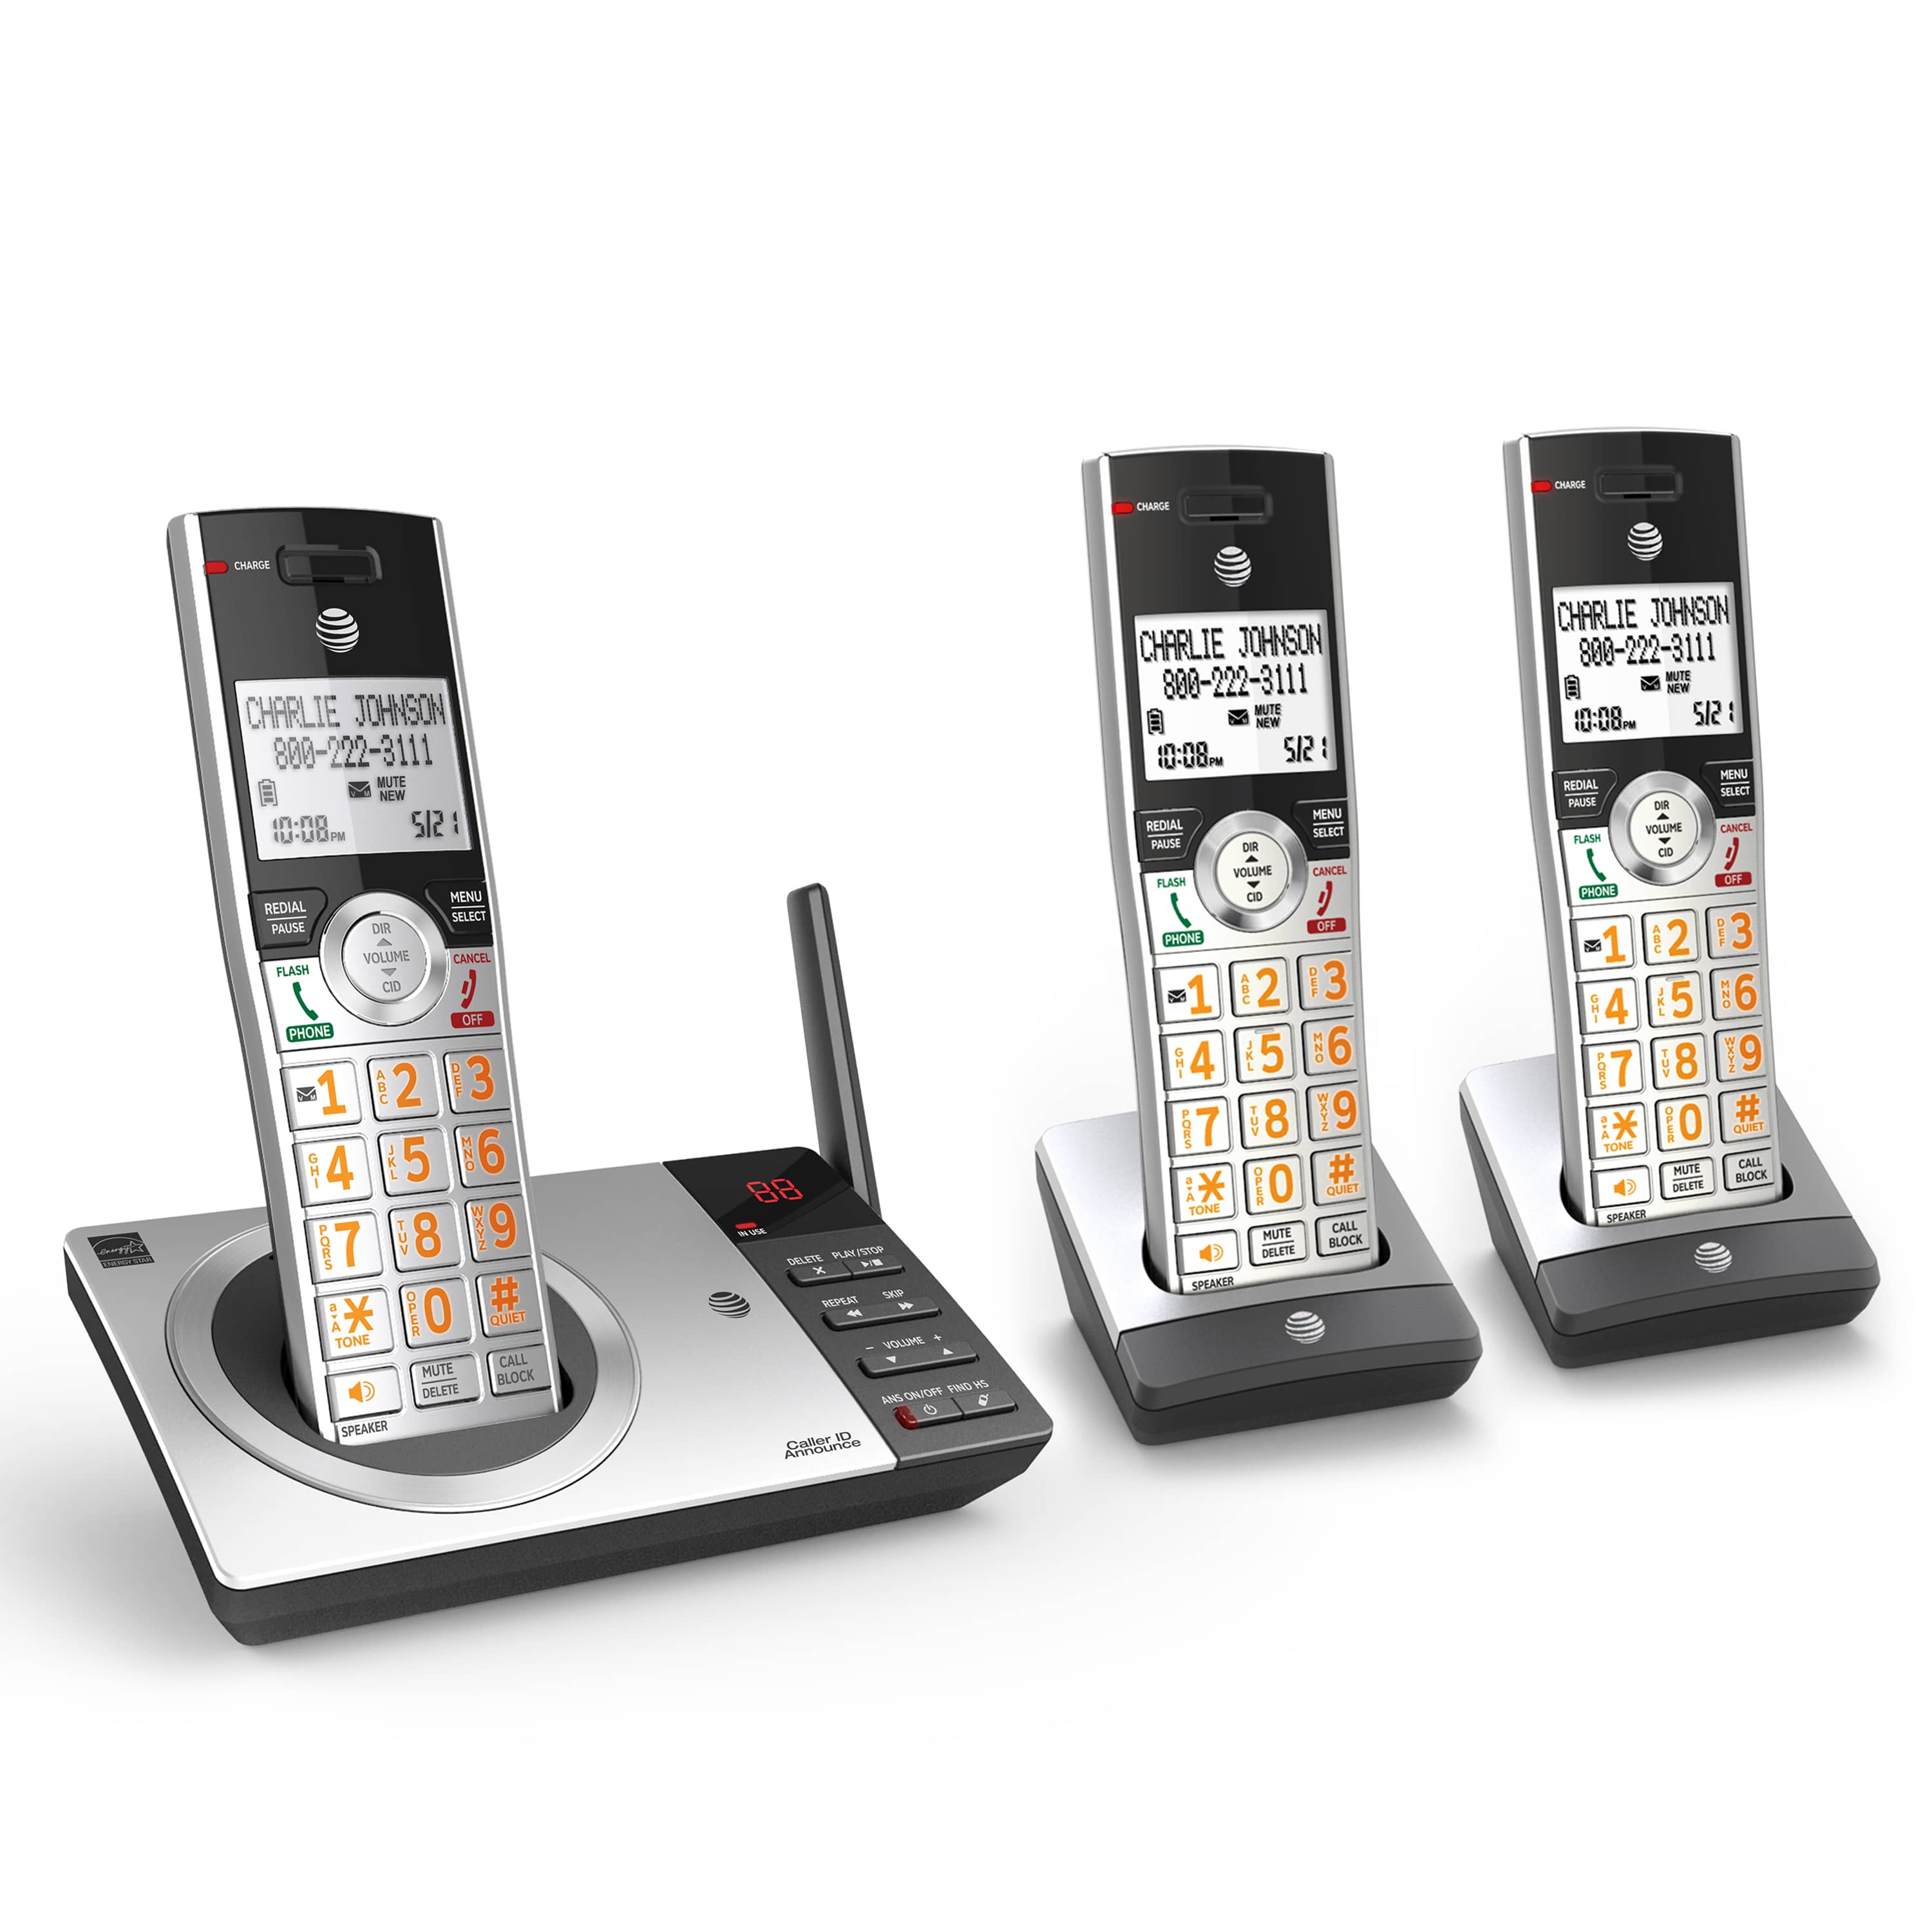 3 handset cordless answering system with smart call blocker - view 3